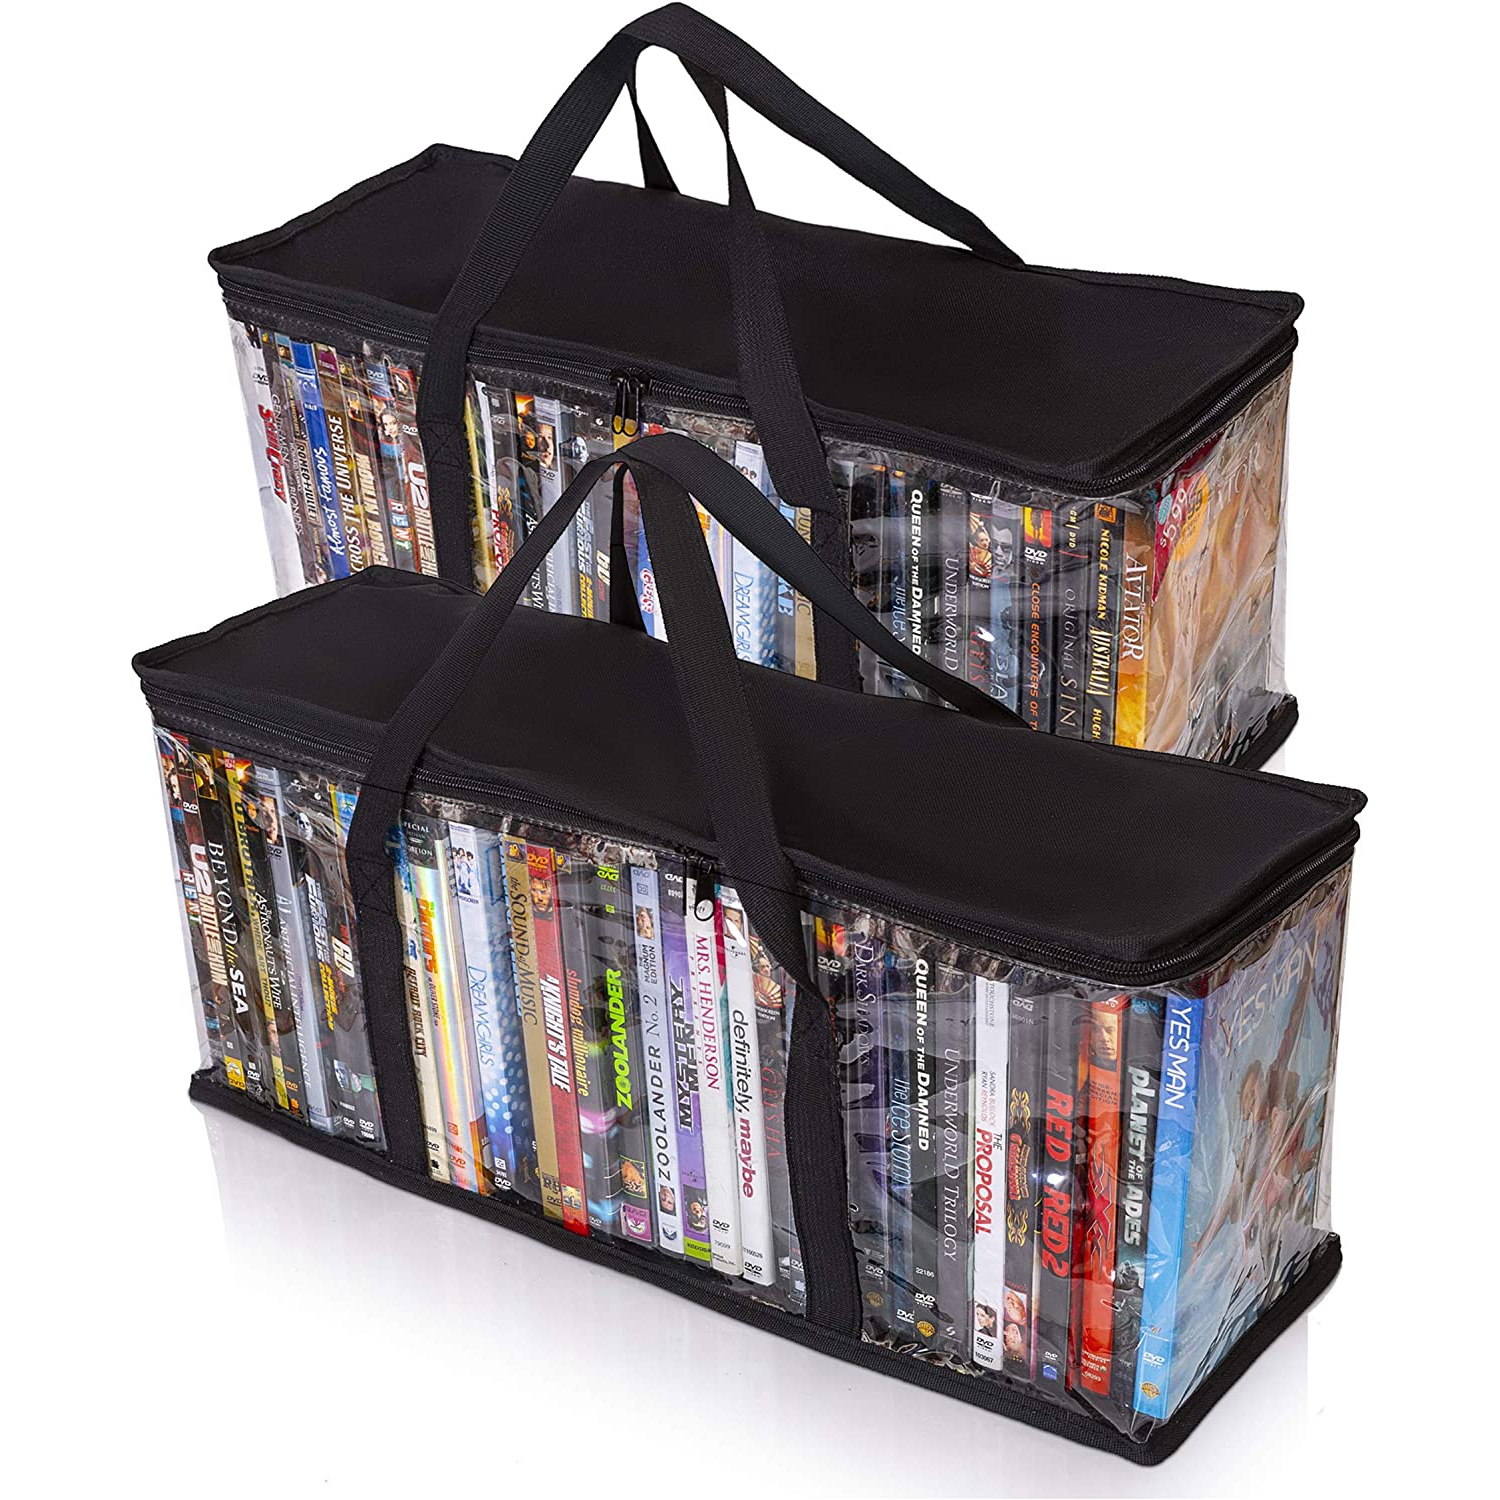 Home DVD Storage Bags (2-Pack) Holds 80 Total Movies or Video Games, Blu-ray, Convenient Travel Case for Media Stackable, Easy to Carry